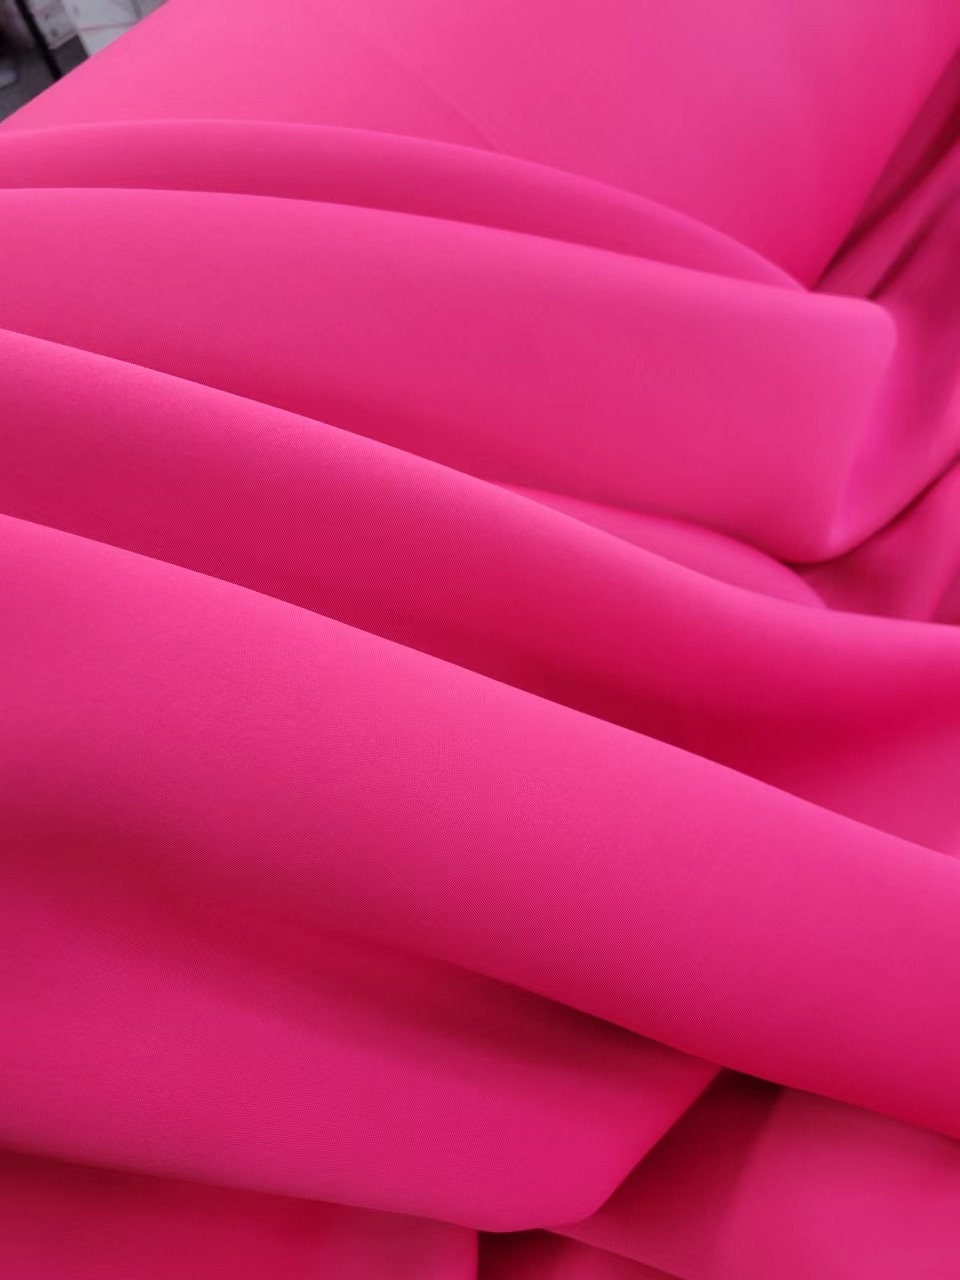 Hot Pink Neon Knit Fabric by the yard Hot Pink Neon solid Techno fabric Hot  Pink Neon Fabric by the yard - 1 Yard Style 412